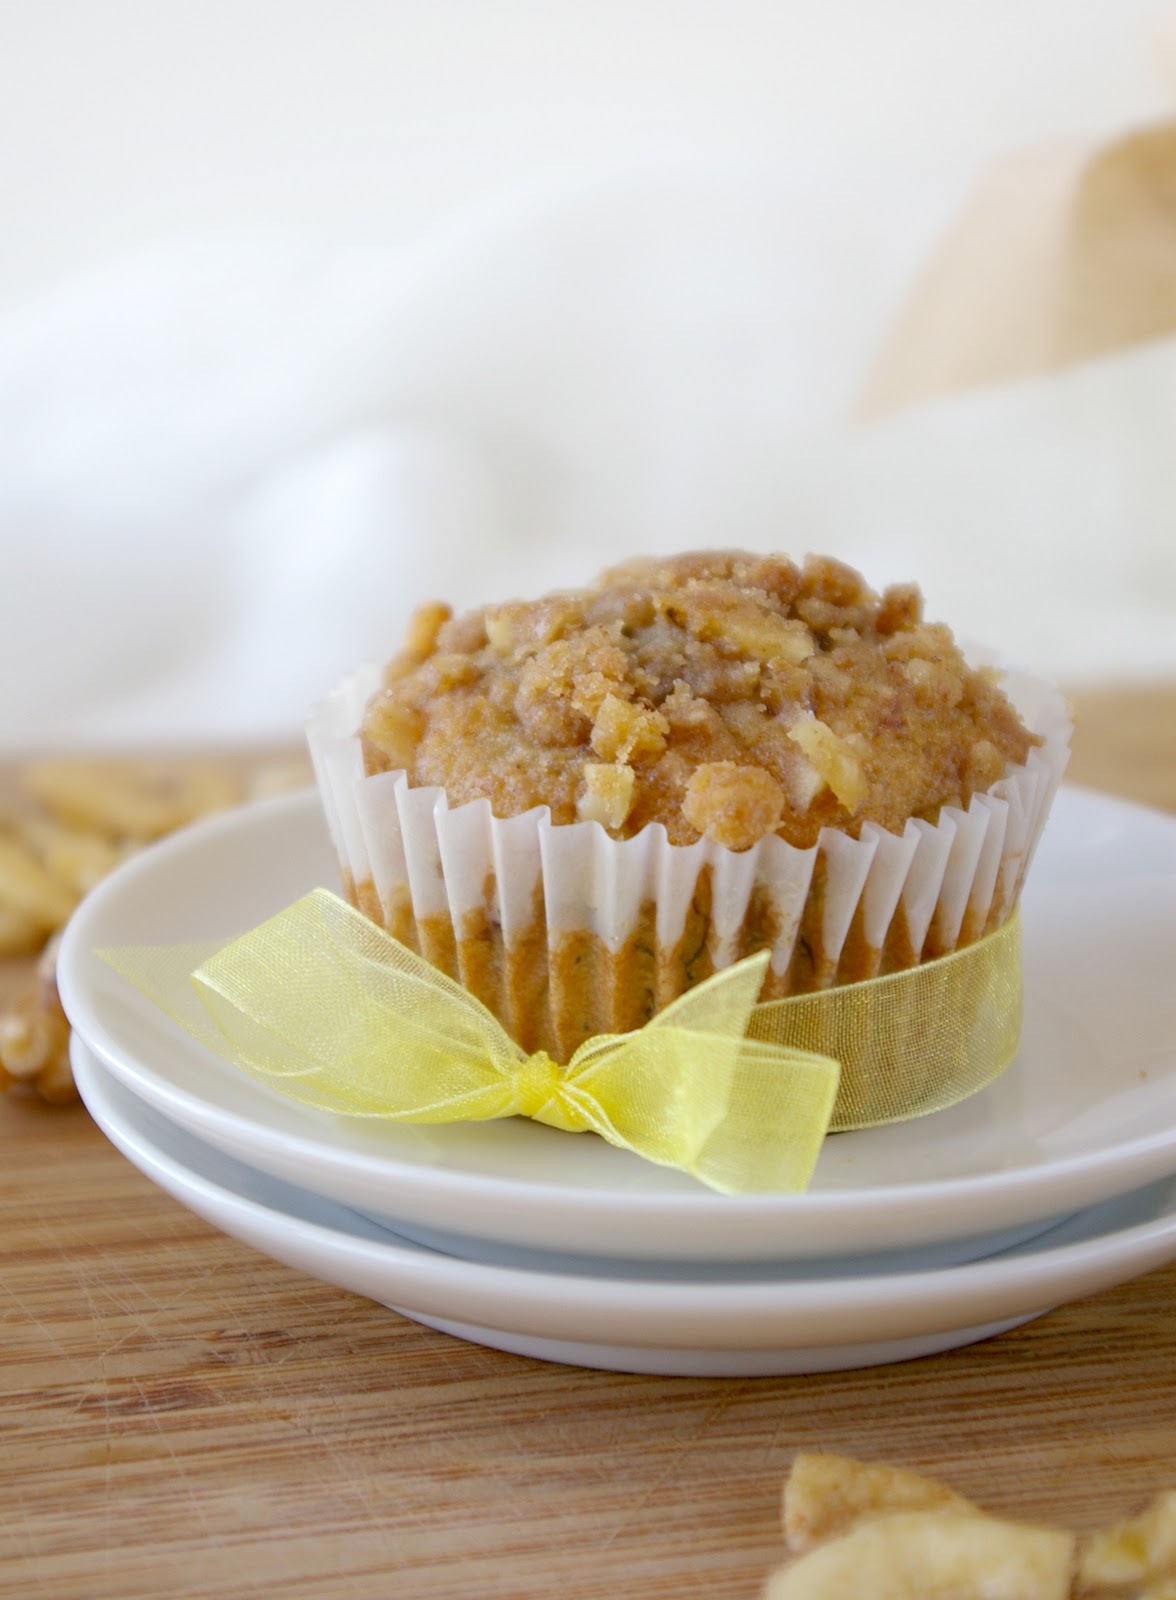 These Peas are Hollow: Banana Streusel Muffins